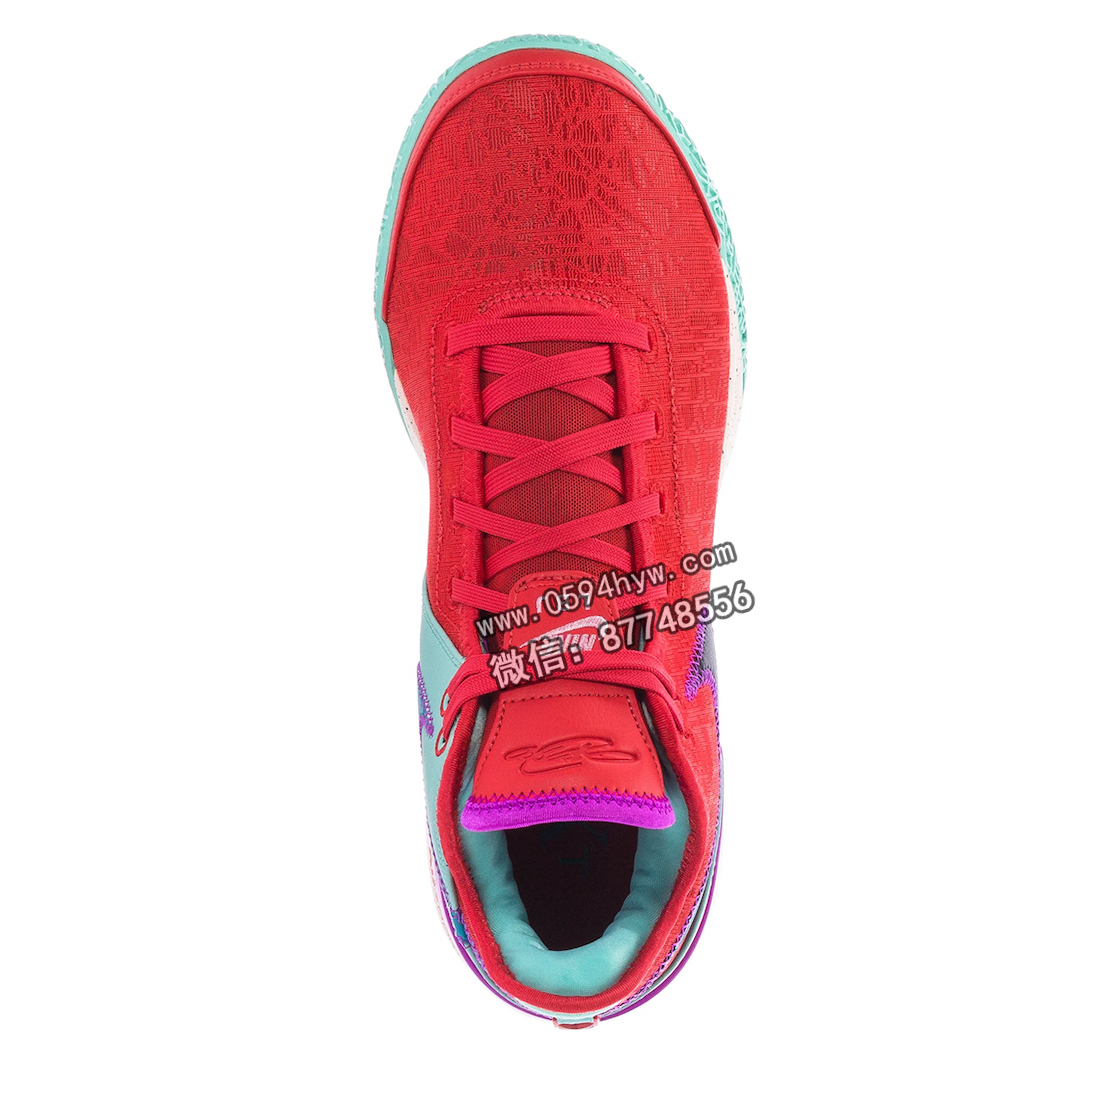 Nike-Zoom-LeBron-NXXT-Gen-Track-Red-Emerald-Rise-DR8784-600-5-1